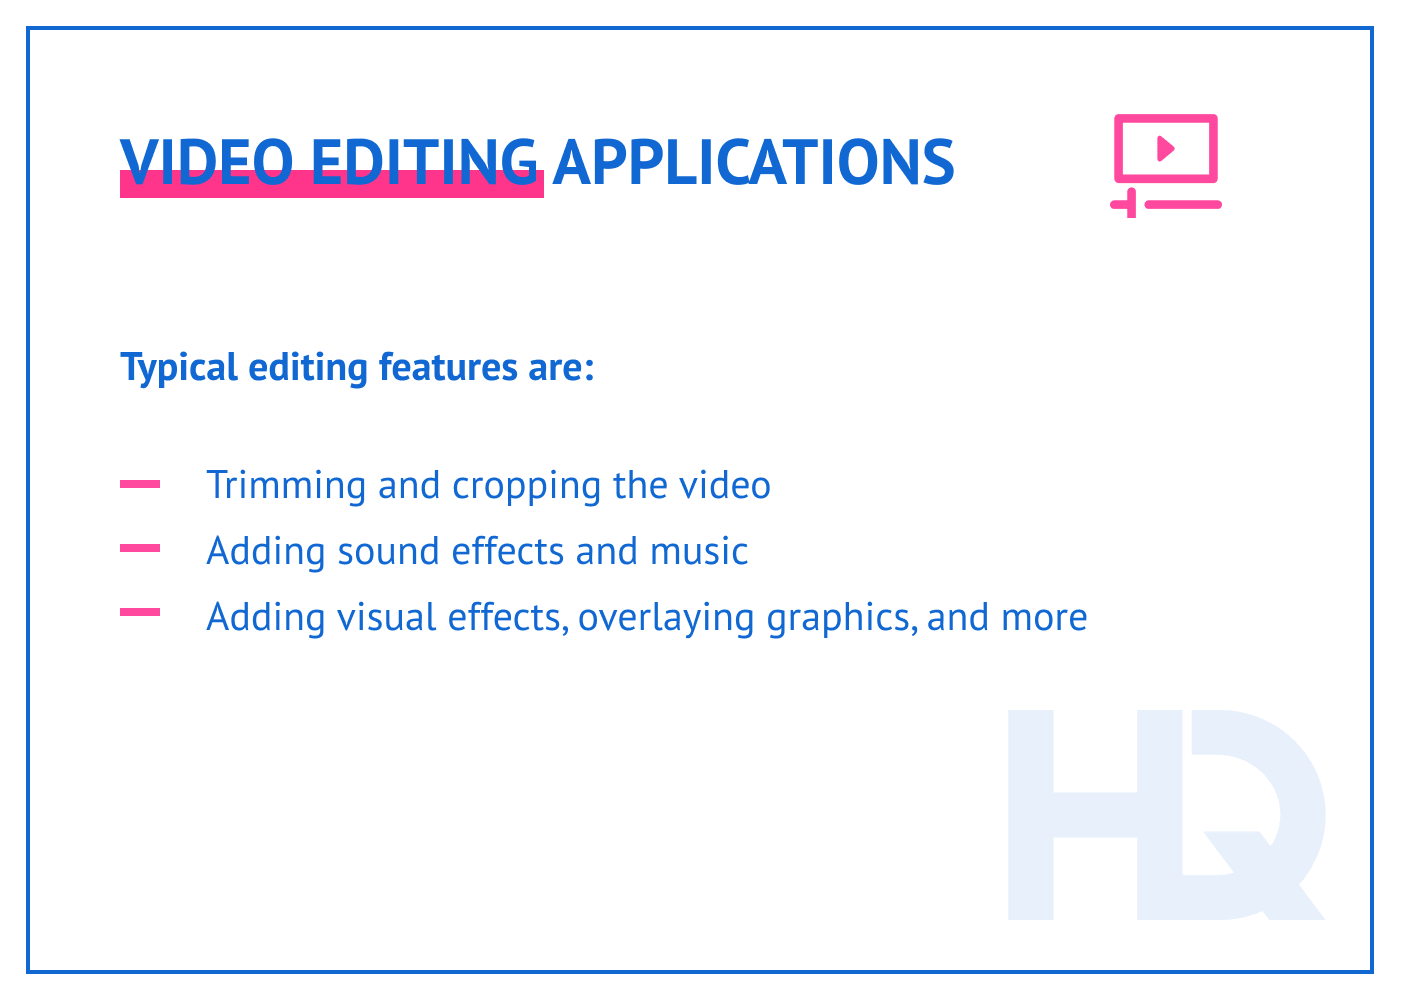 Video editing applications features.